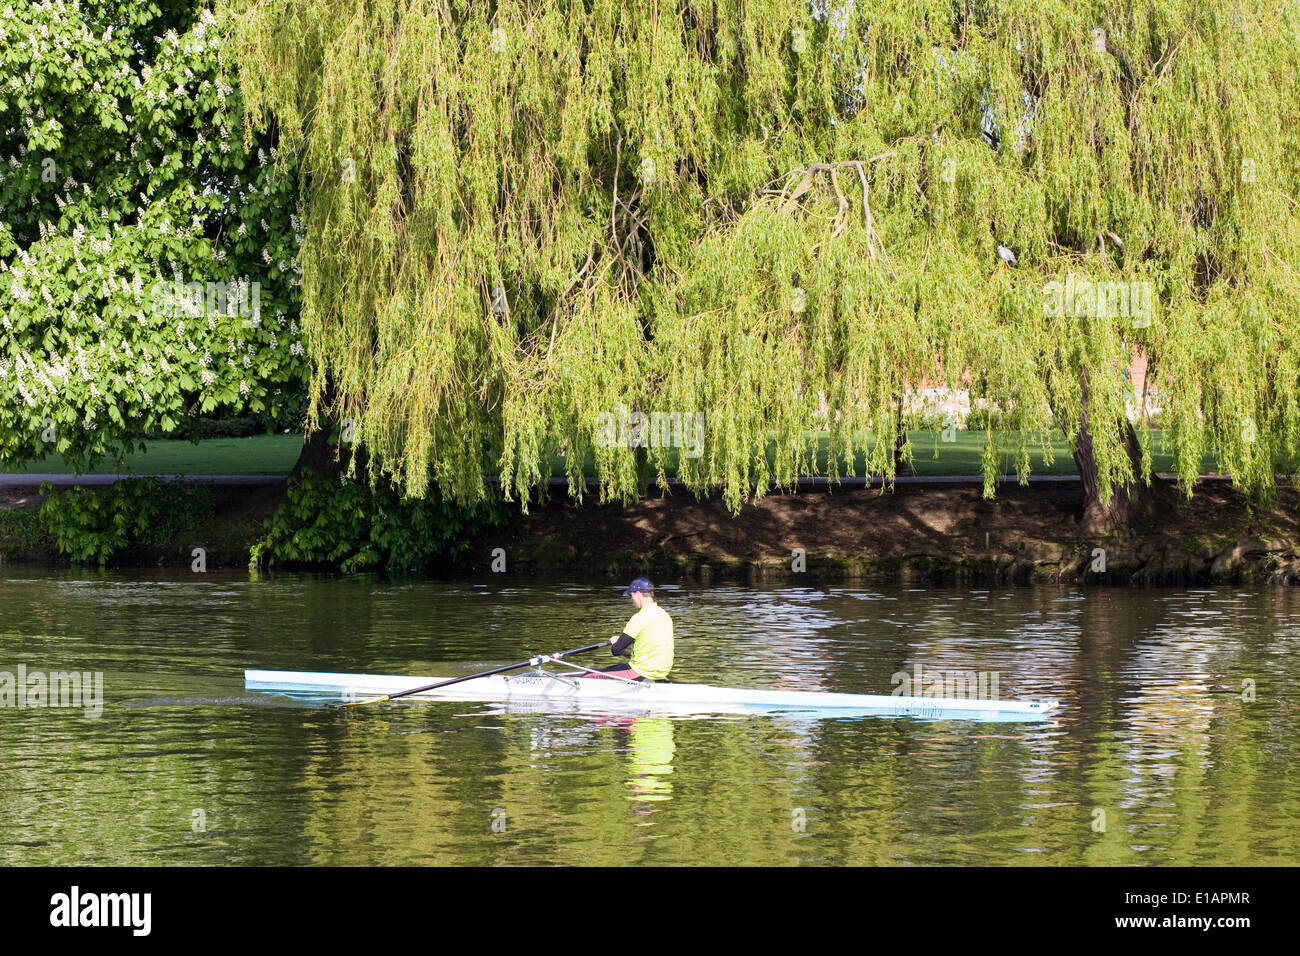 Man rowing a canoe down the River Avon in Warwickshire England Stock Photo